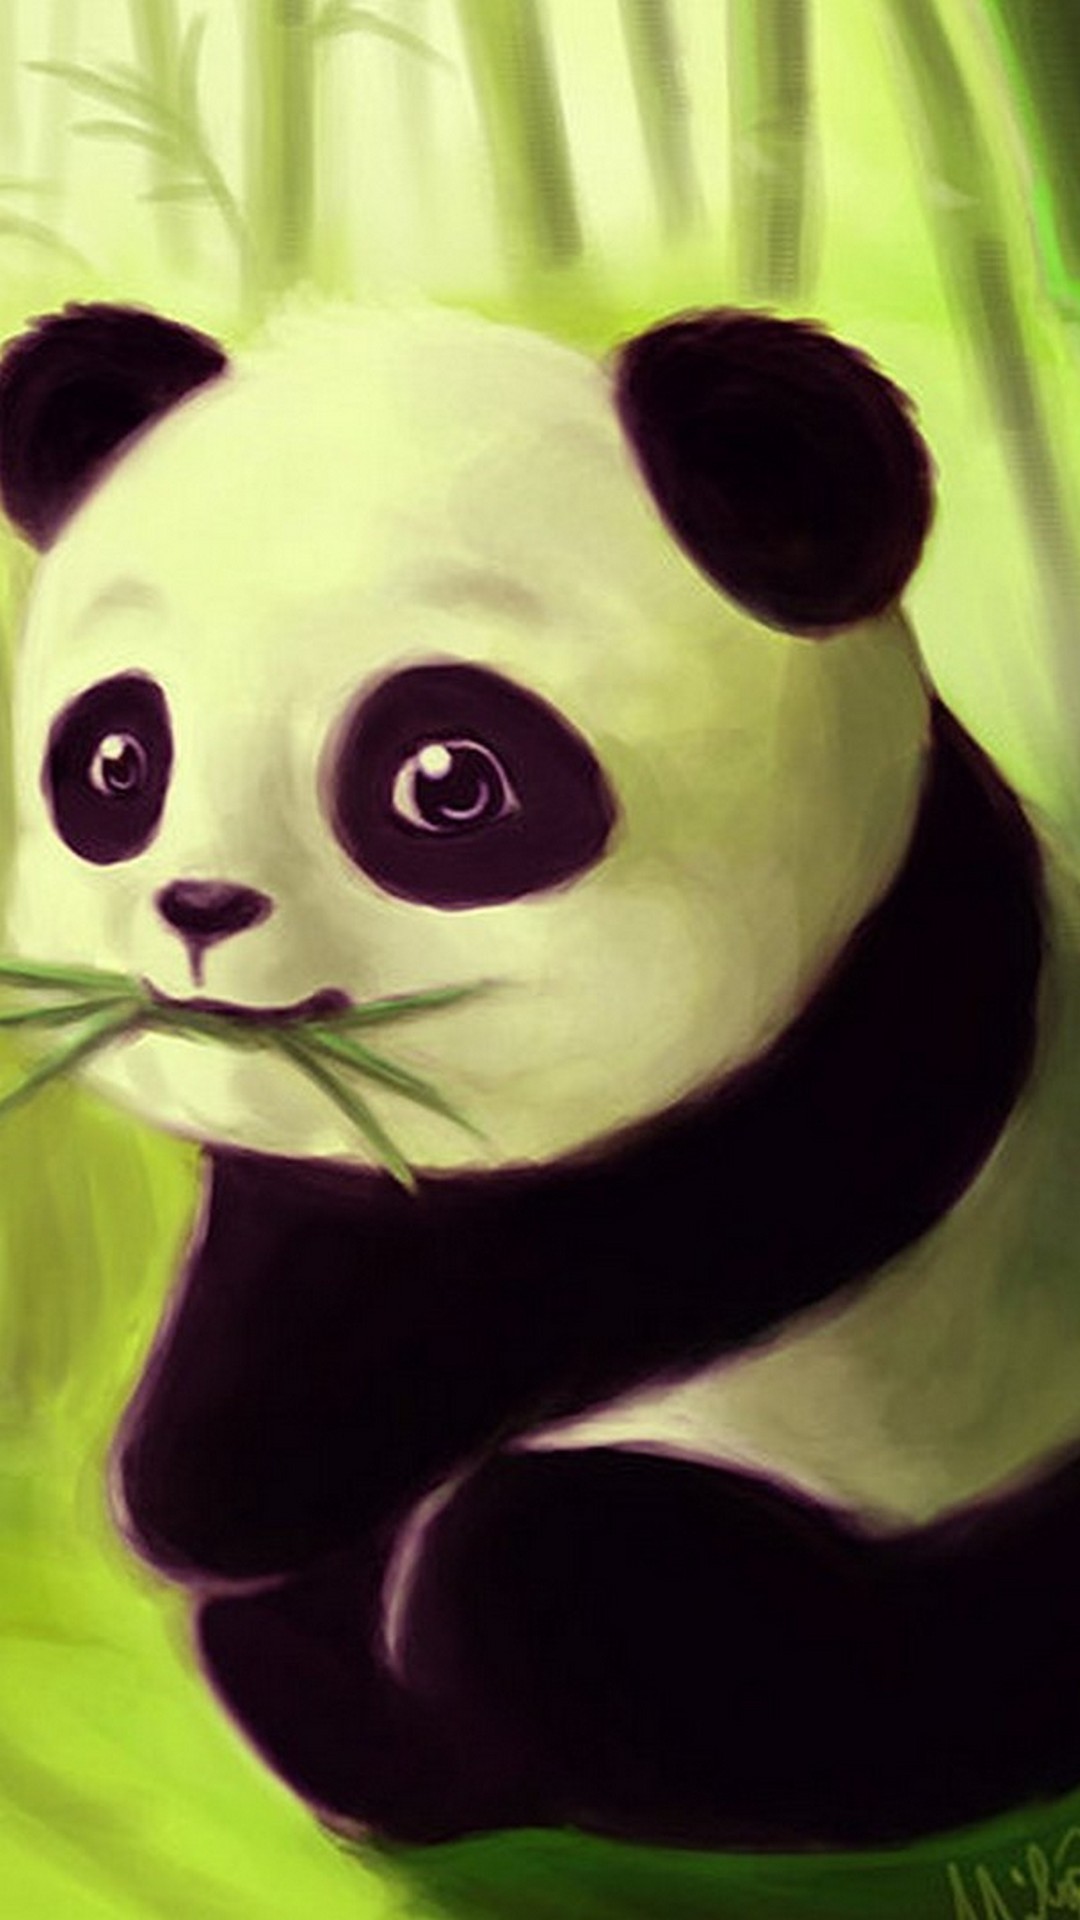 Wallpaper Android Baby Panda with HD resolution 1080x1920